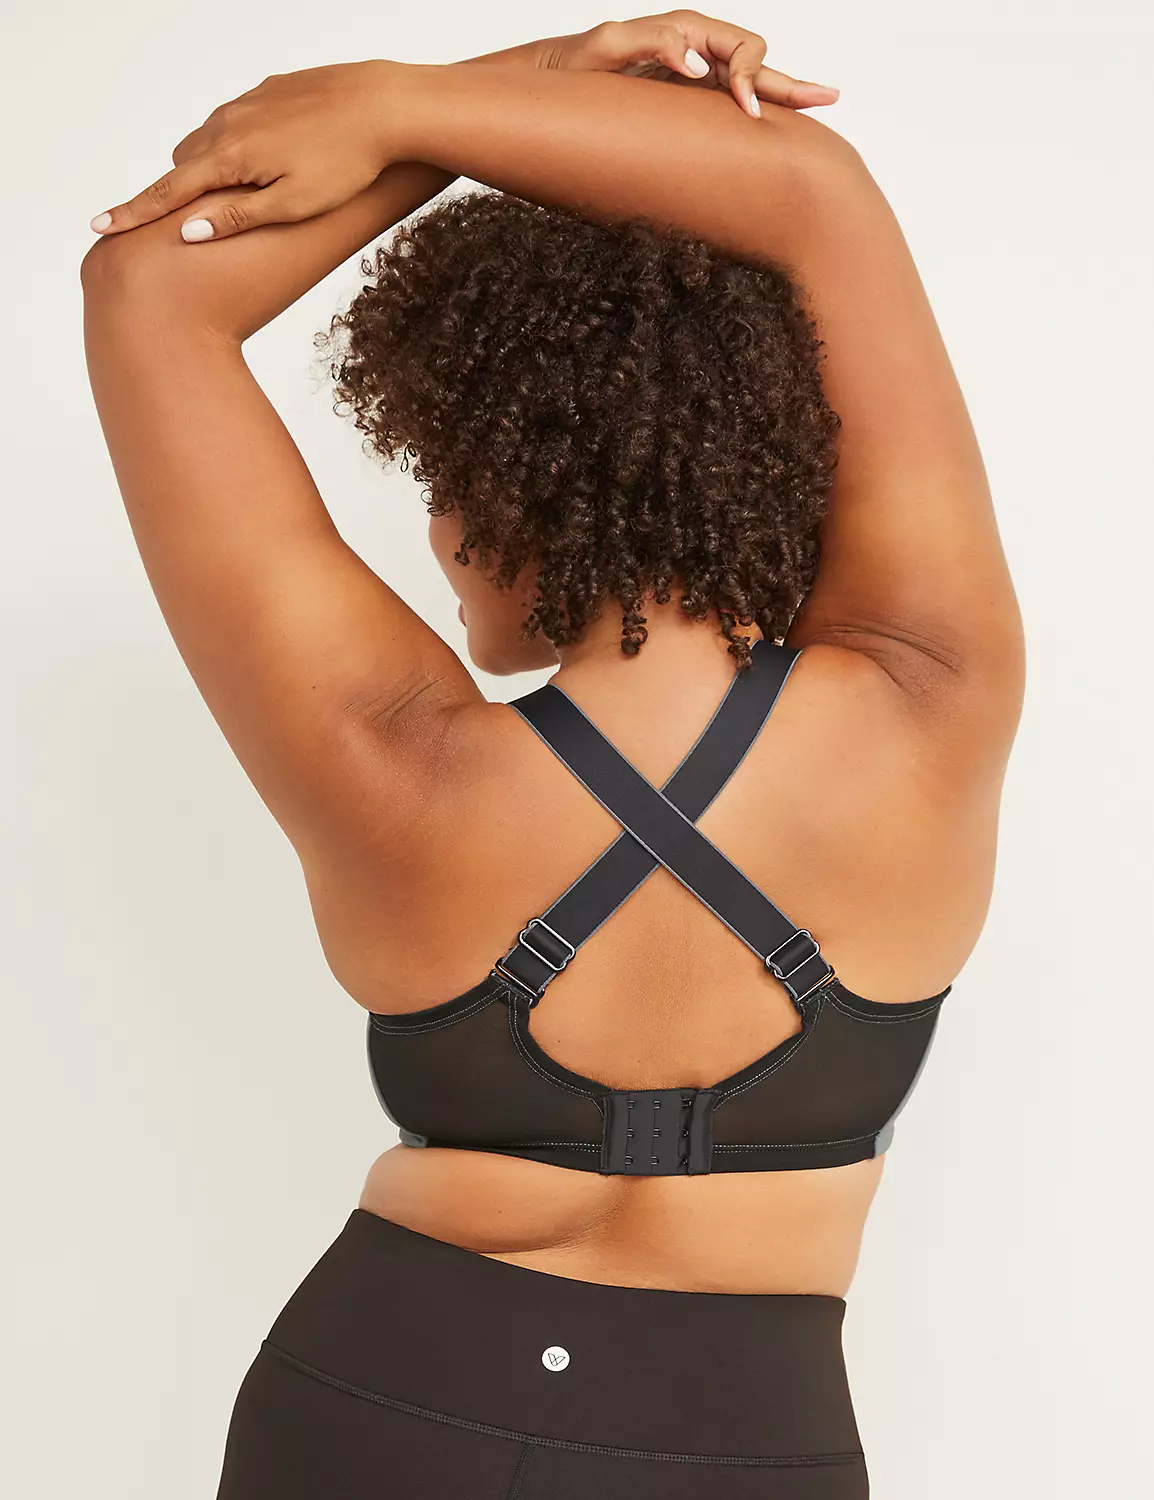 How to Pick the Best Sports Bra for HIIT